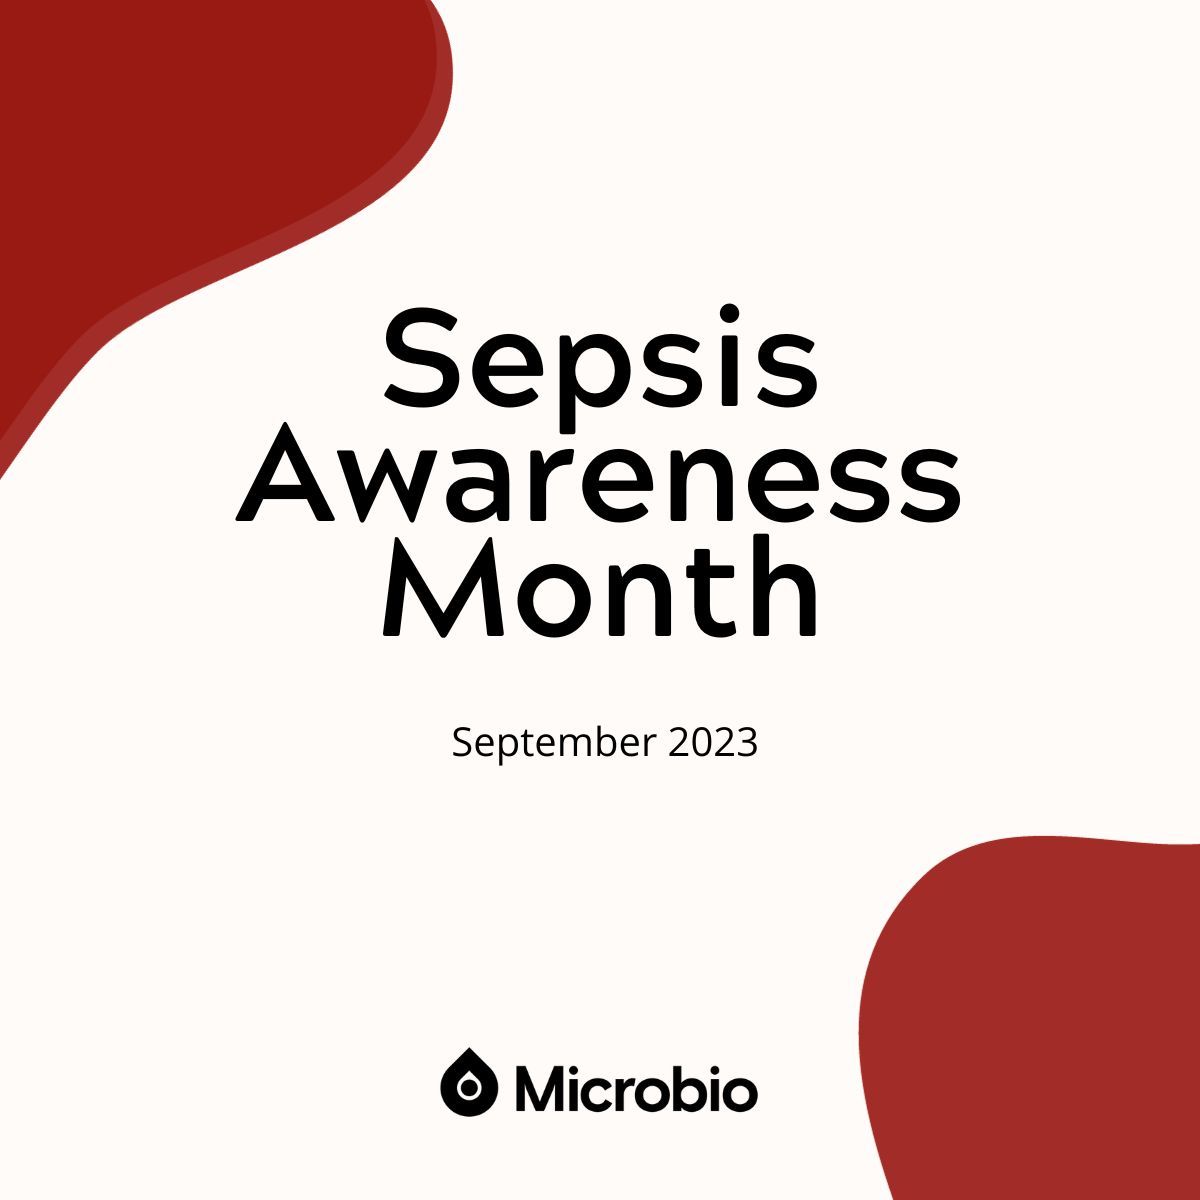 As #SepsisAwarenessMonth draws to a close, Microbio would like to thank the many advocates, researchers, policy-makers, health care professionals and carers working tirelessly to improve the outcomes for #sepsis sufferers. #worldsepsisday #sepsisawareness